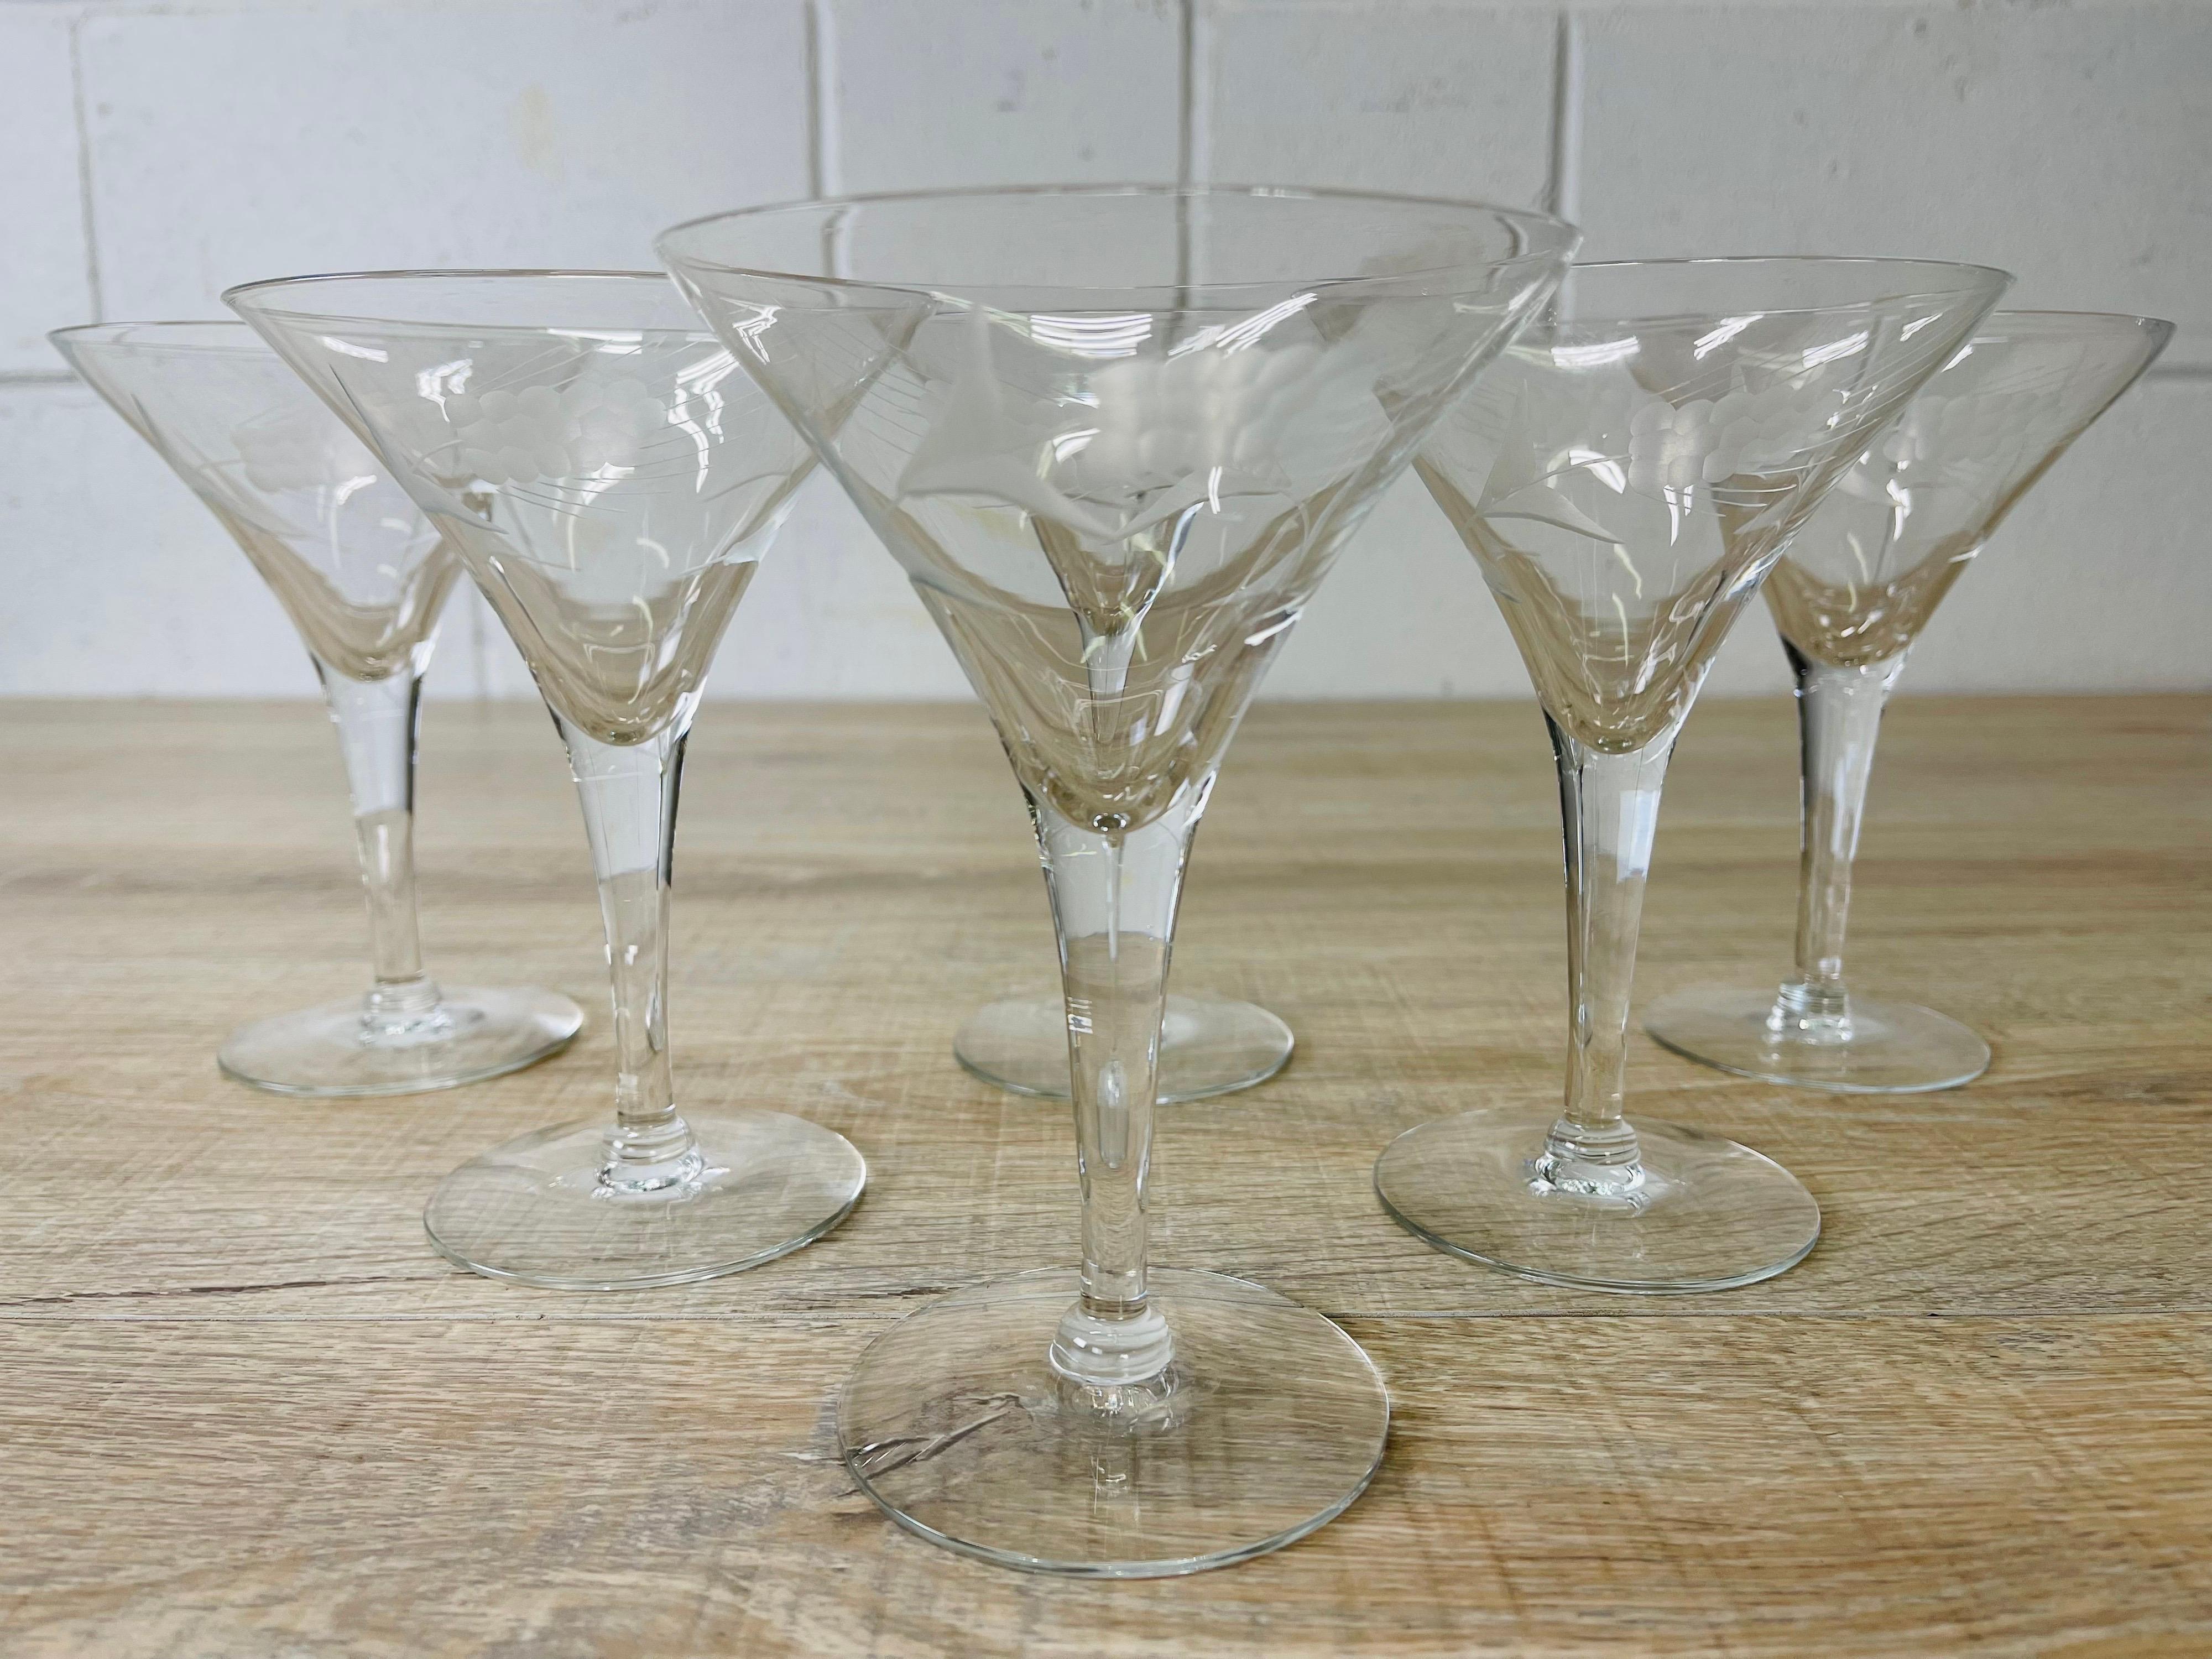 Vintage 1950s set of 6 clear glass martini stems with a grape design. No marks.